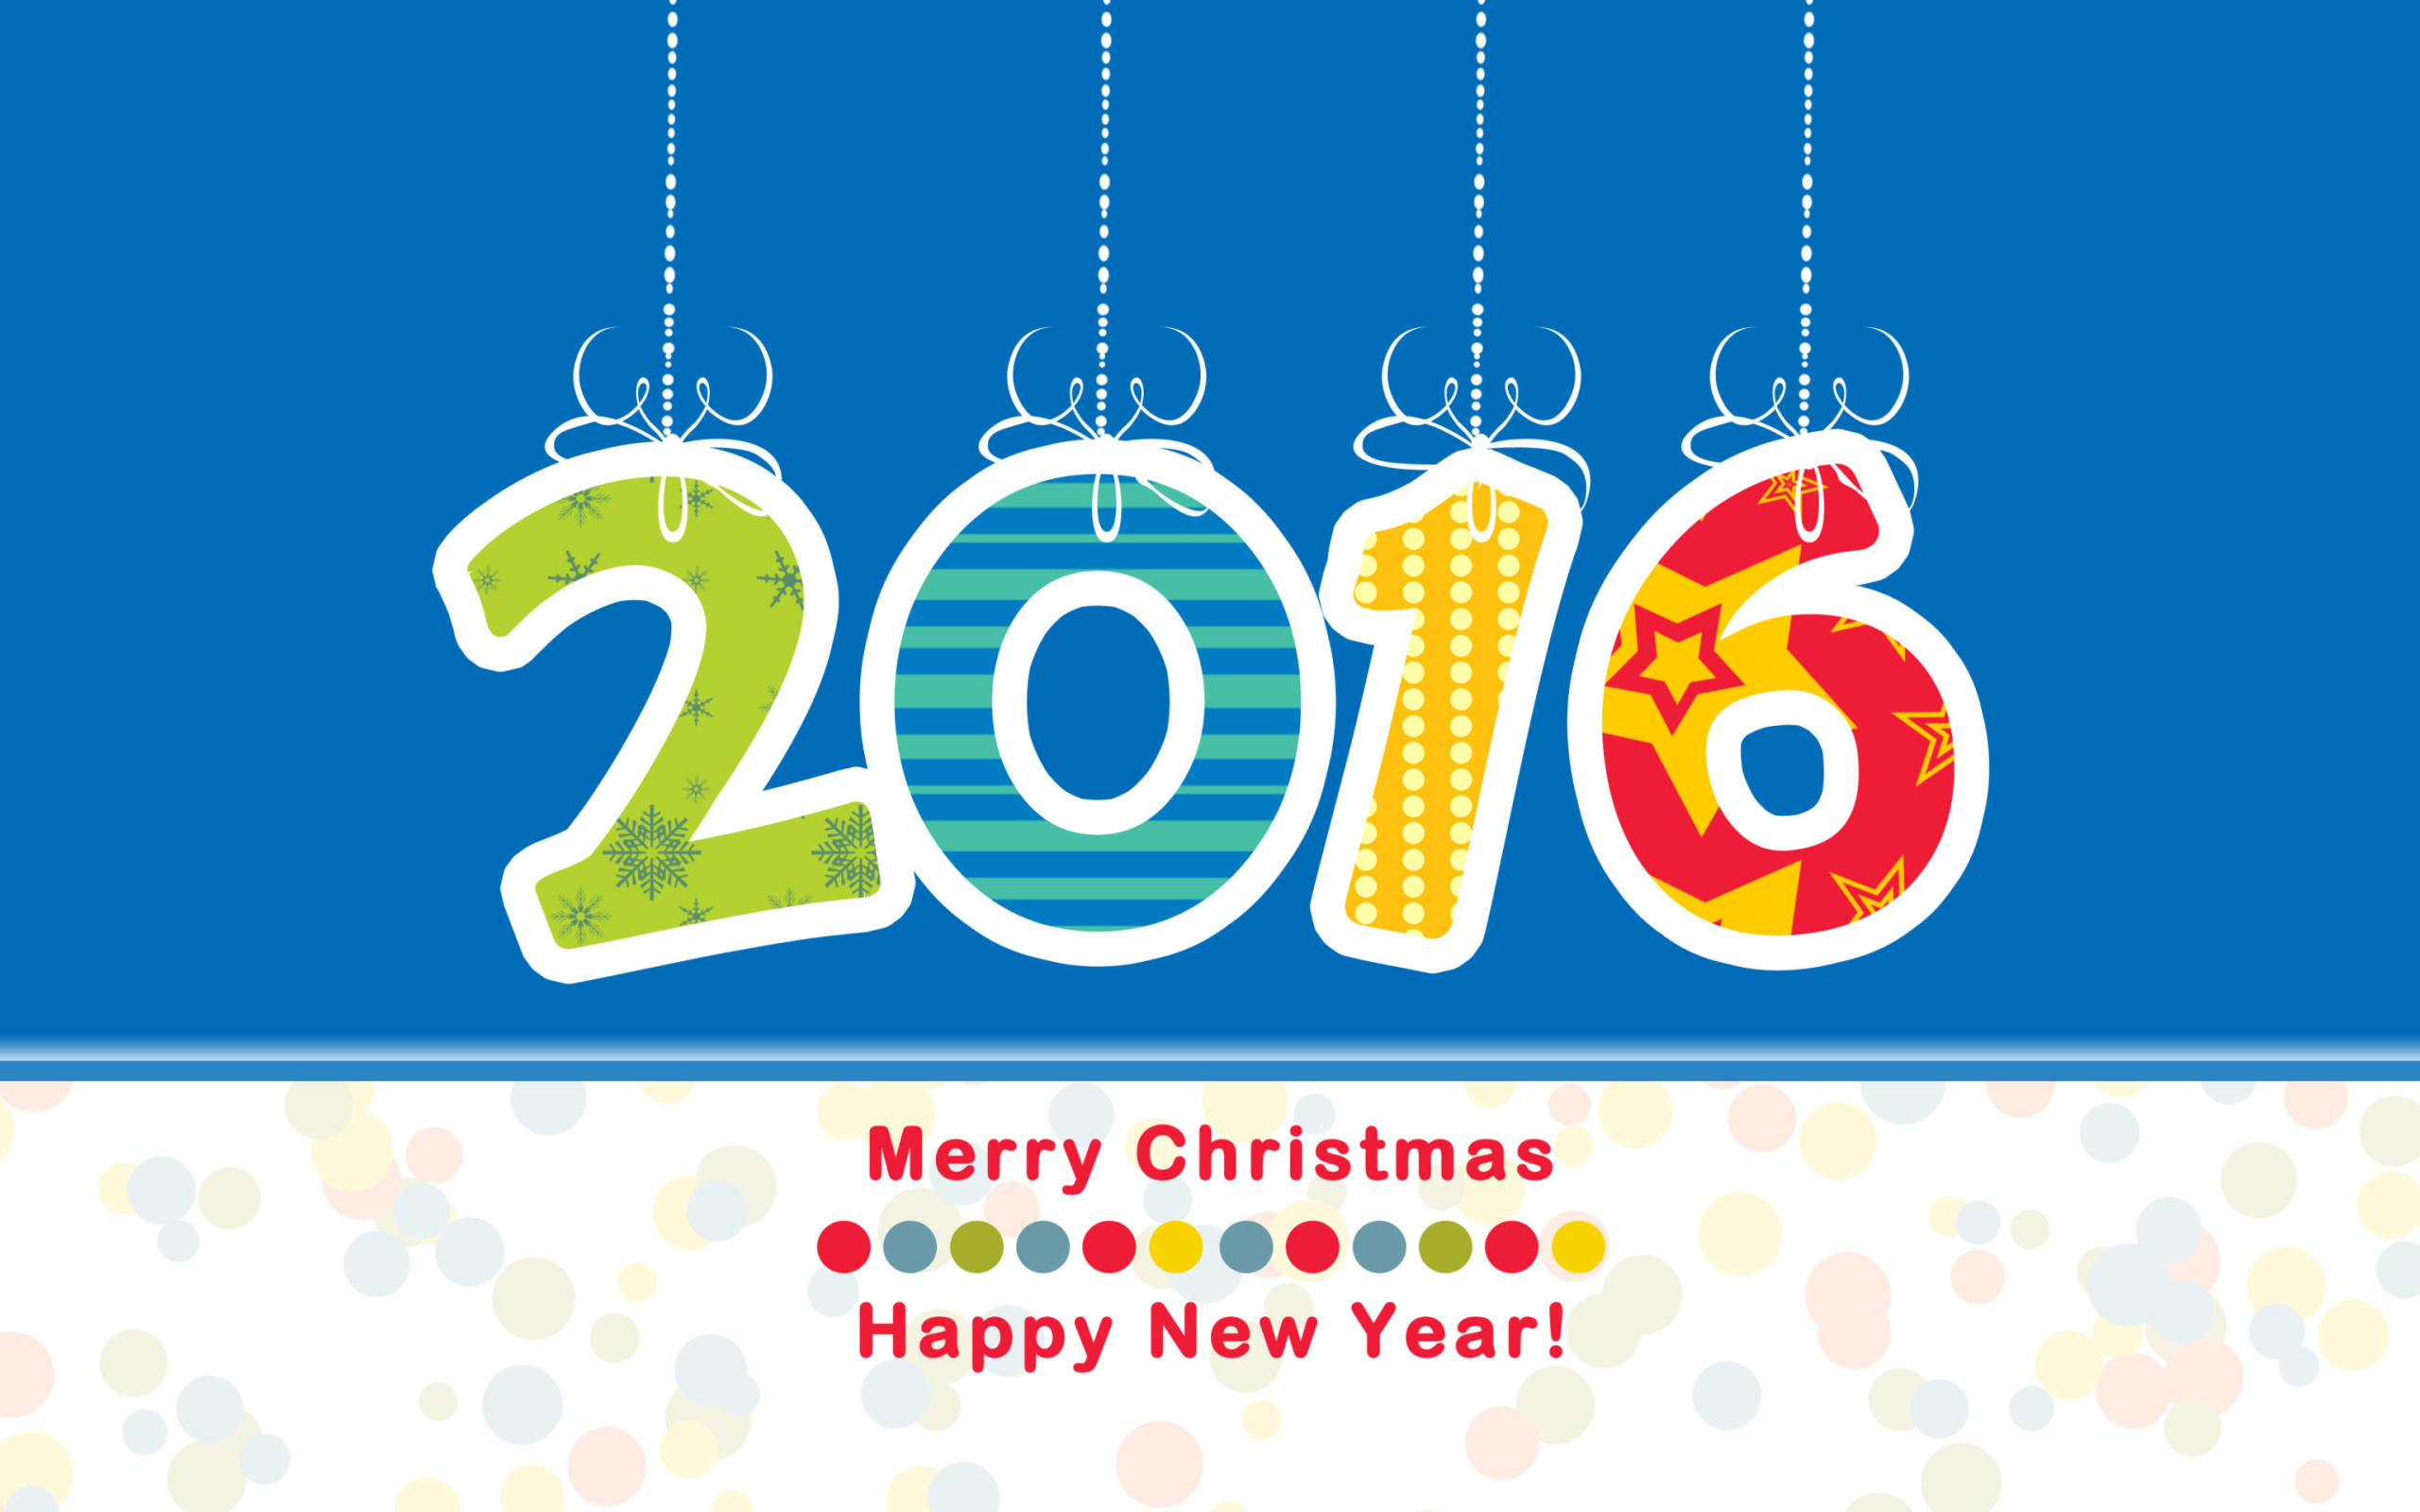 Colorful New Year 2016 Greetings wallpaper 2560x1600